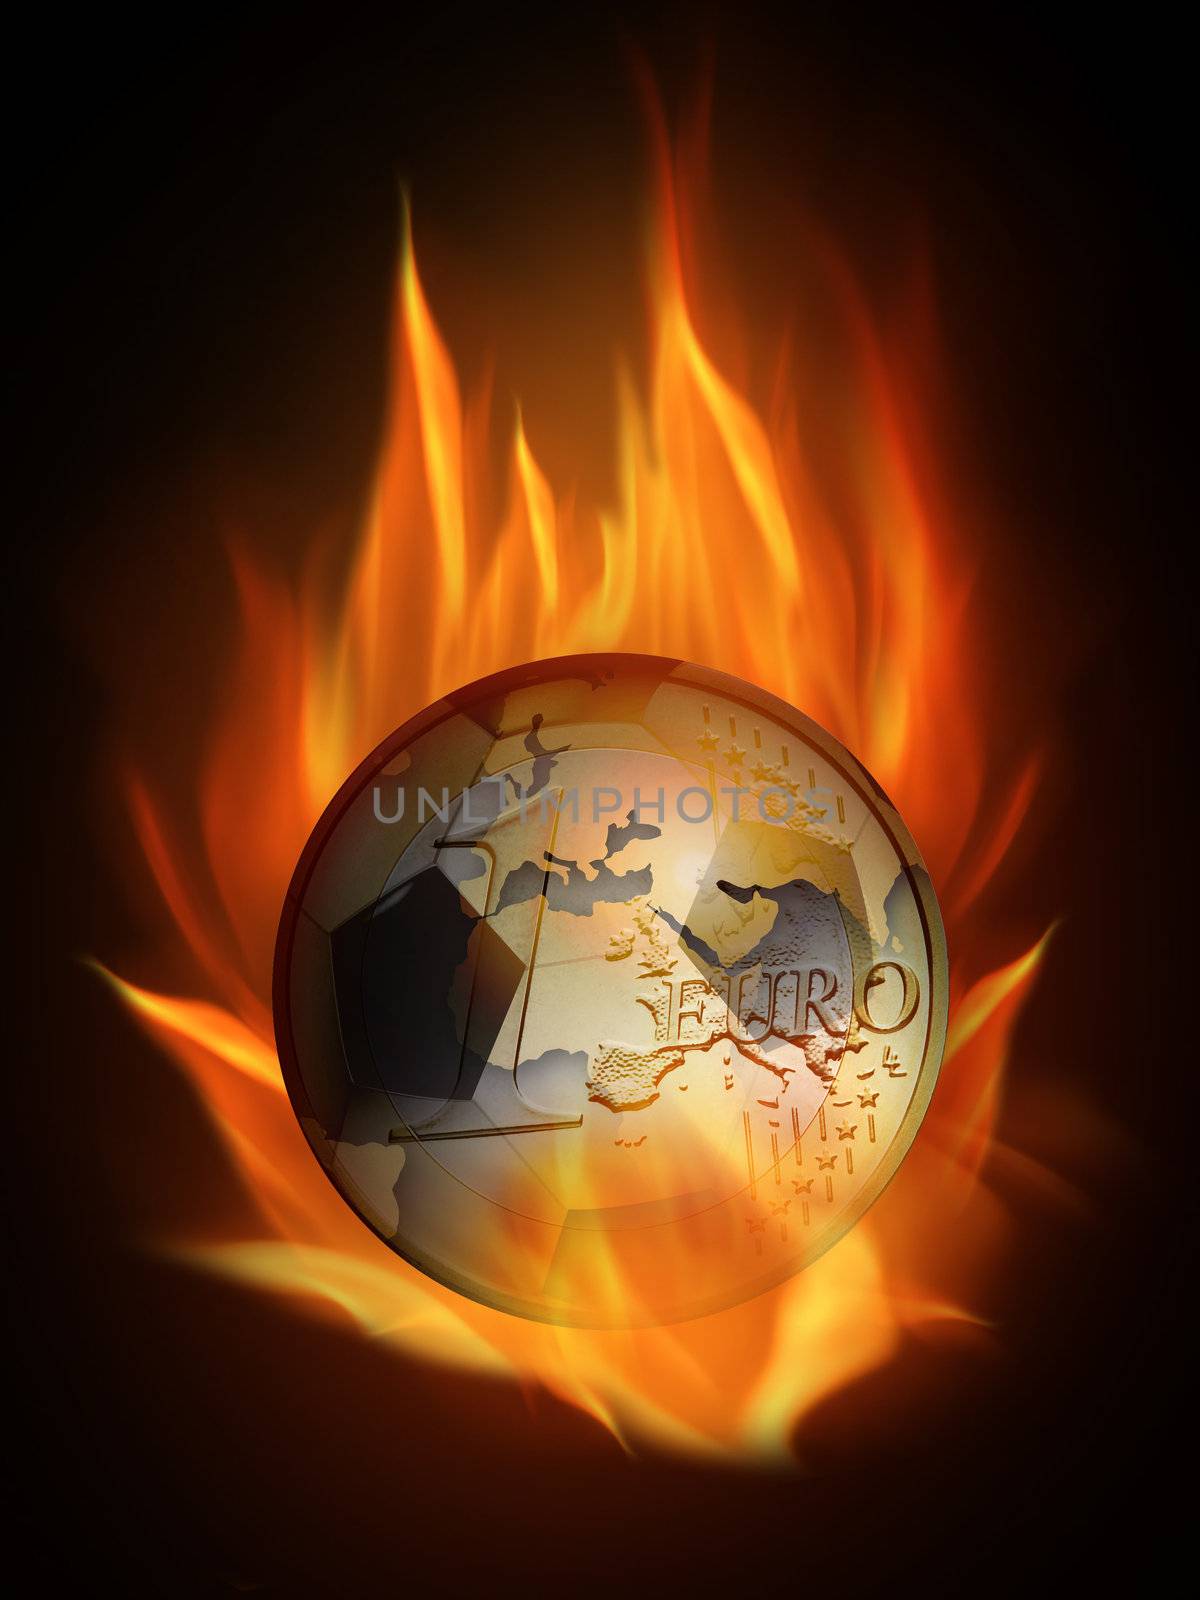 The hot burning world euro ball with many flames